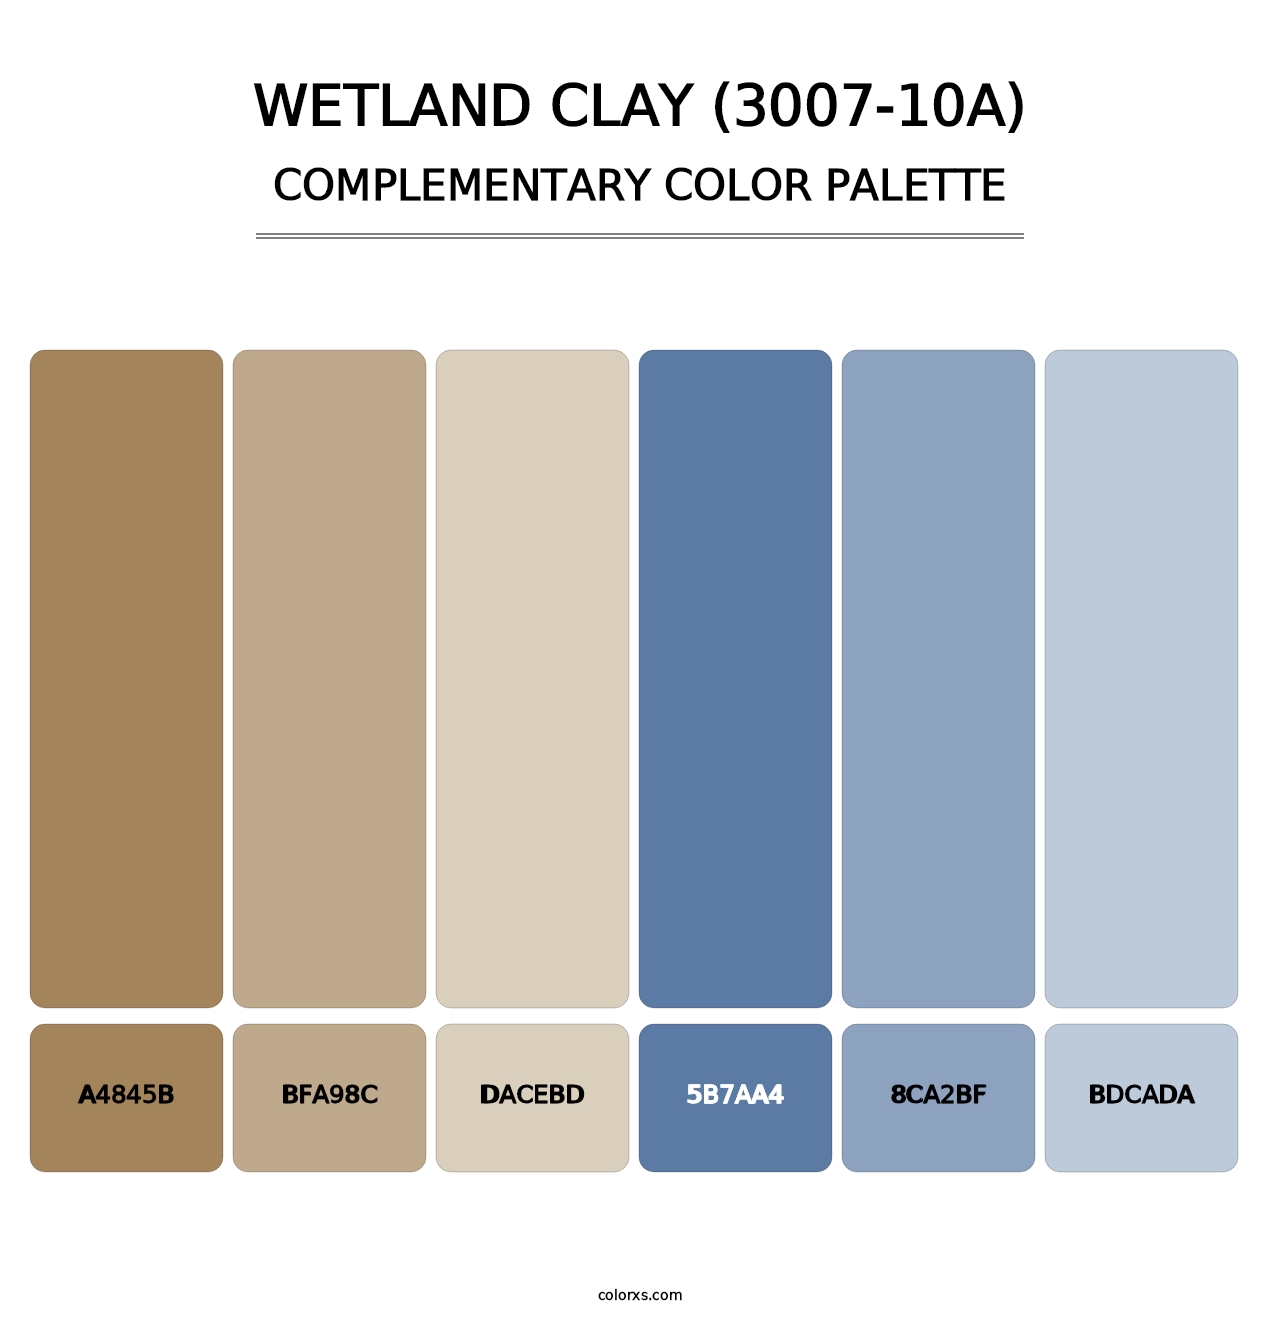 Wetland Clay (3007-10A) - Complementary Color Palette